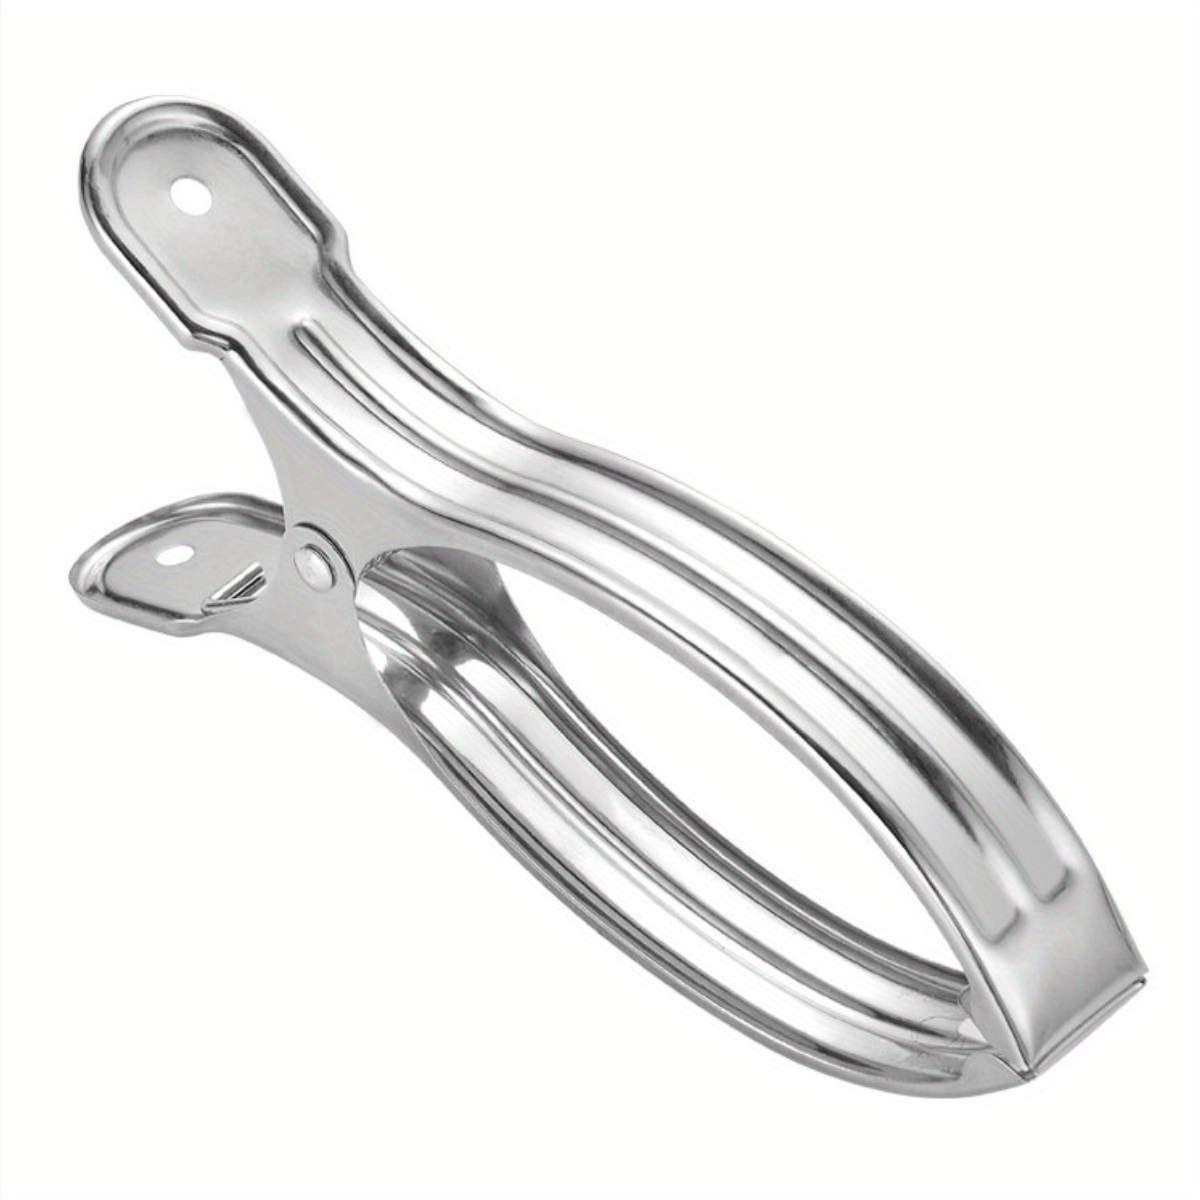 Stainless Steel Tongs - 7 - Greenhouse Home